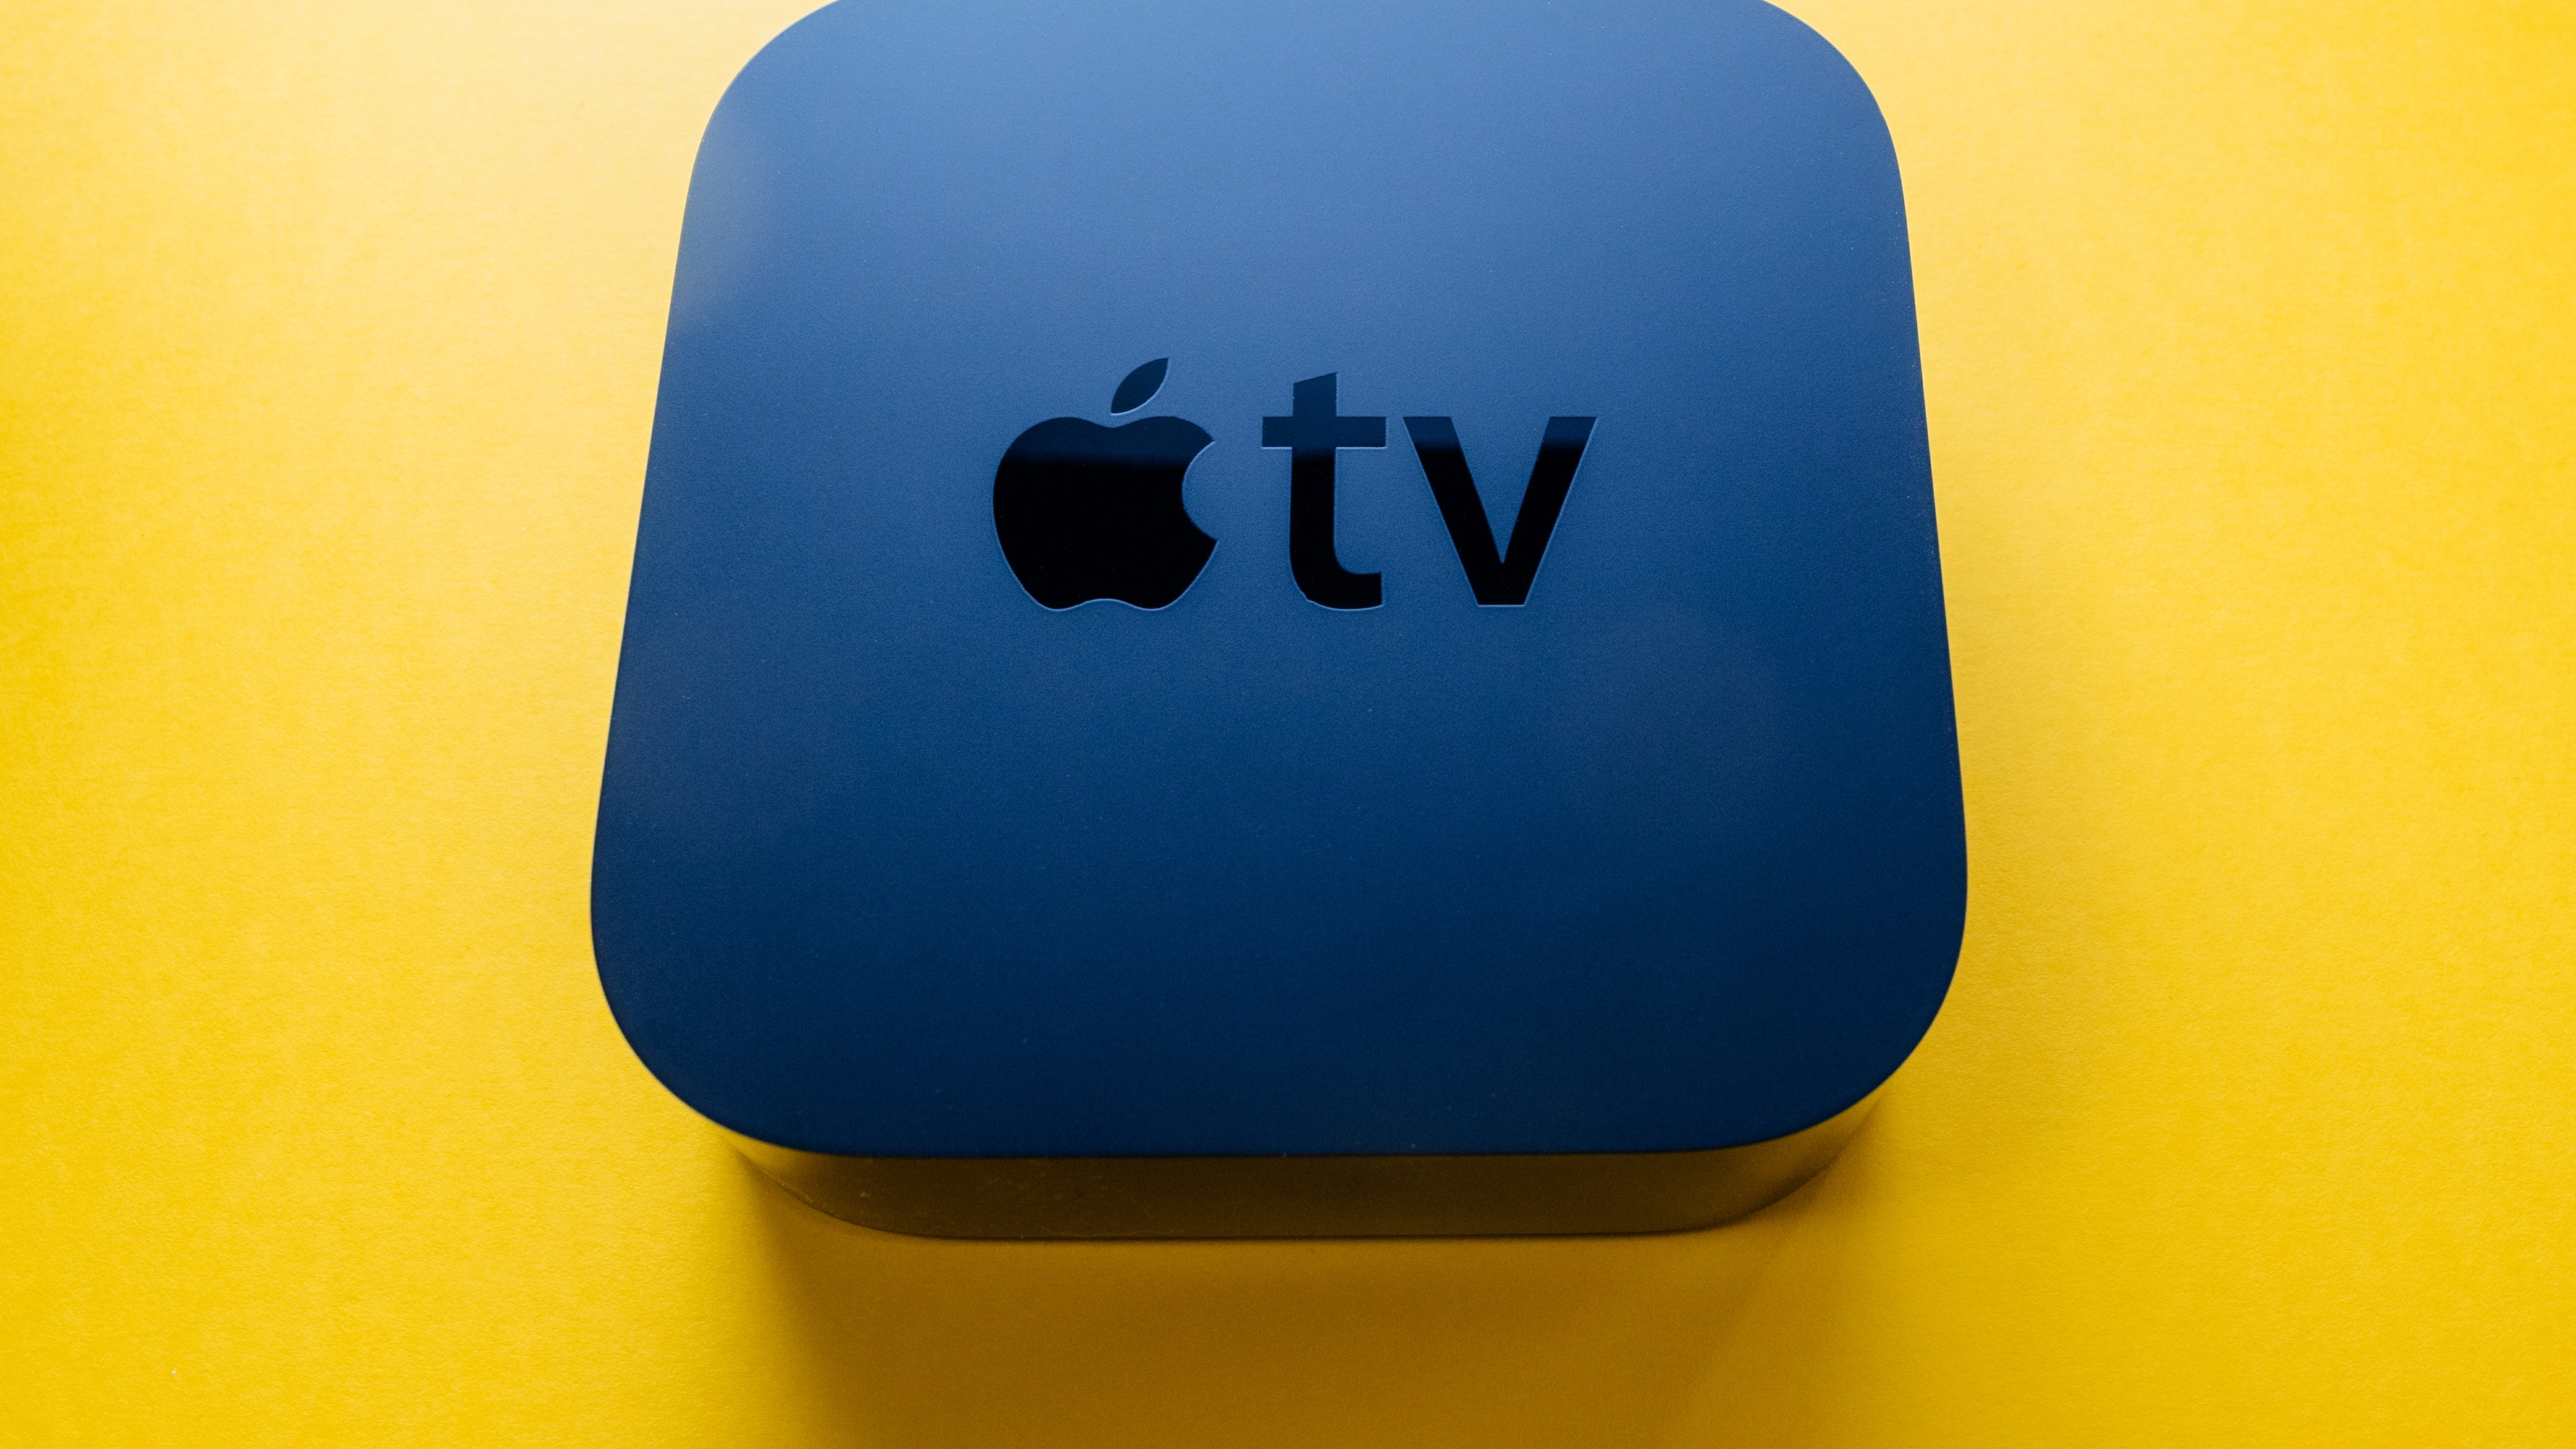 Apple Says 'Enough' As Google-NFL Deal Pushes Sports TV Rights Limits